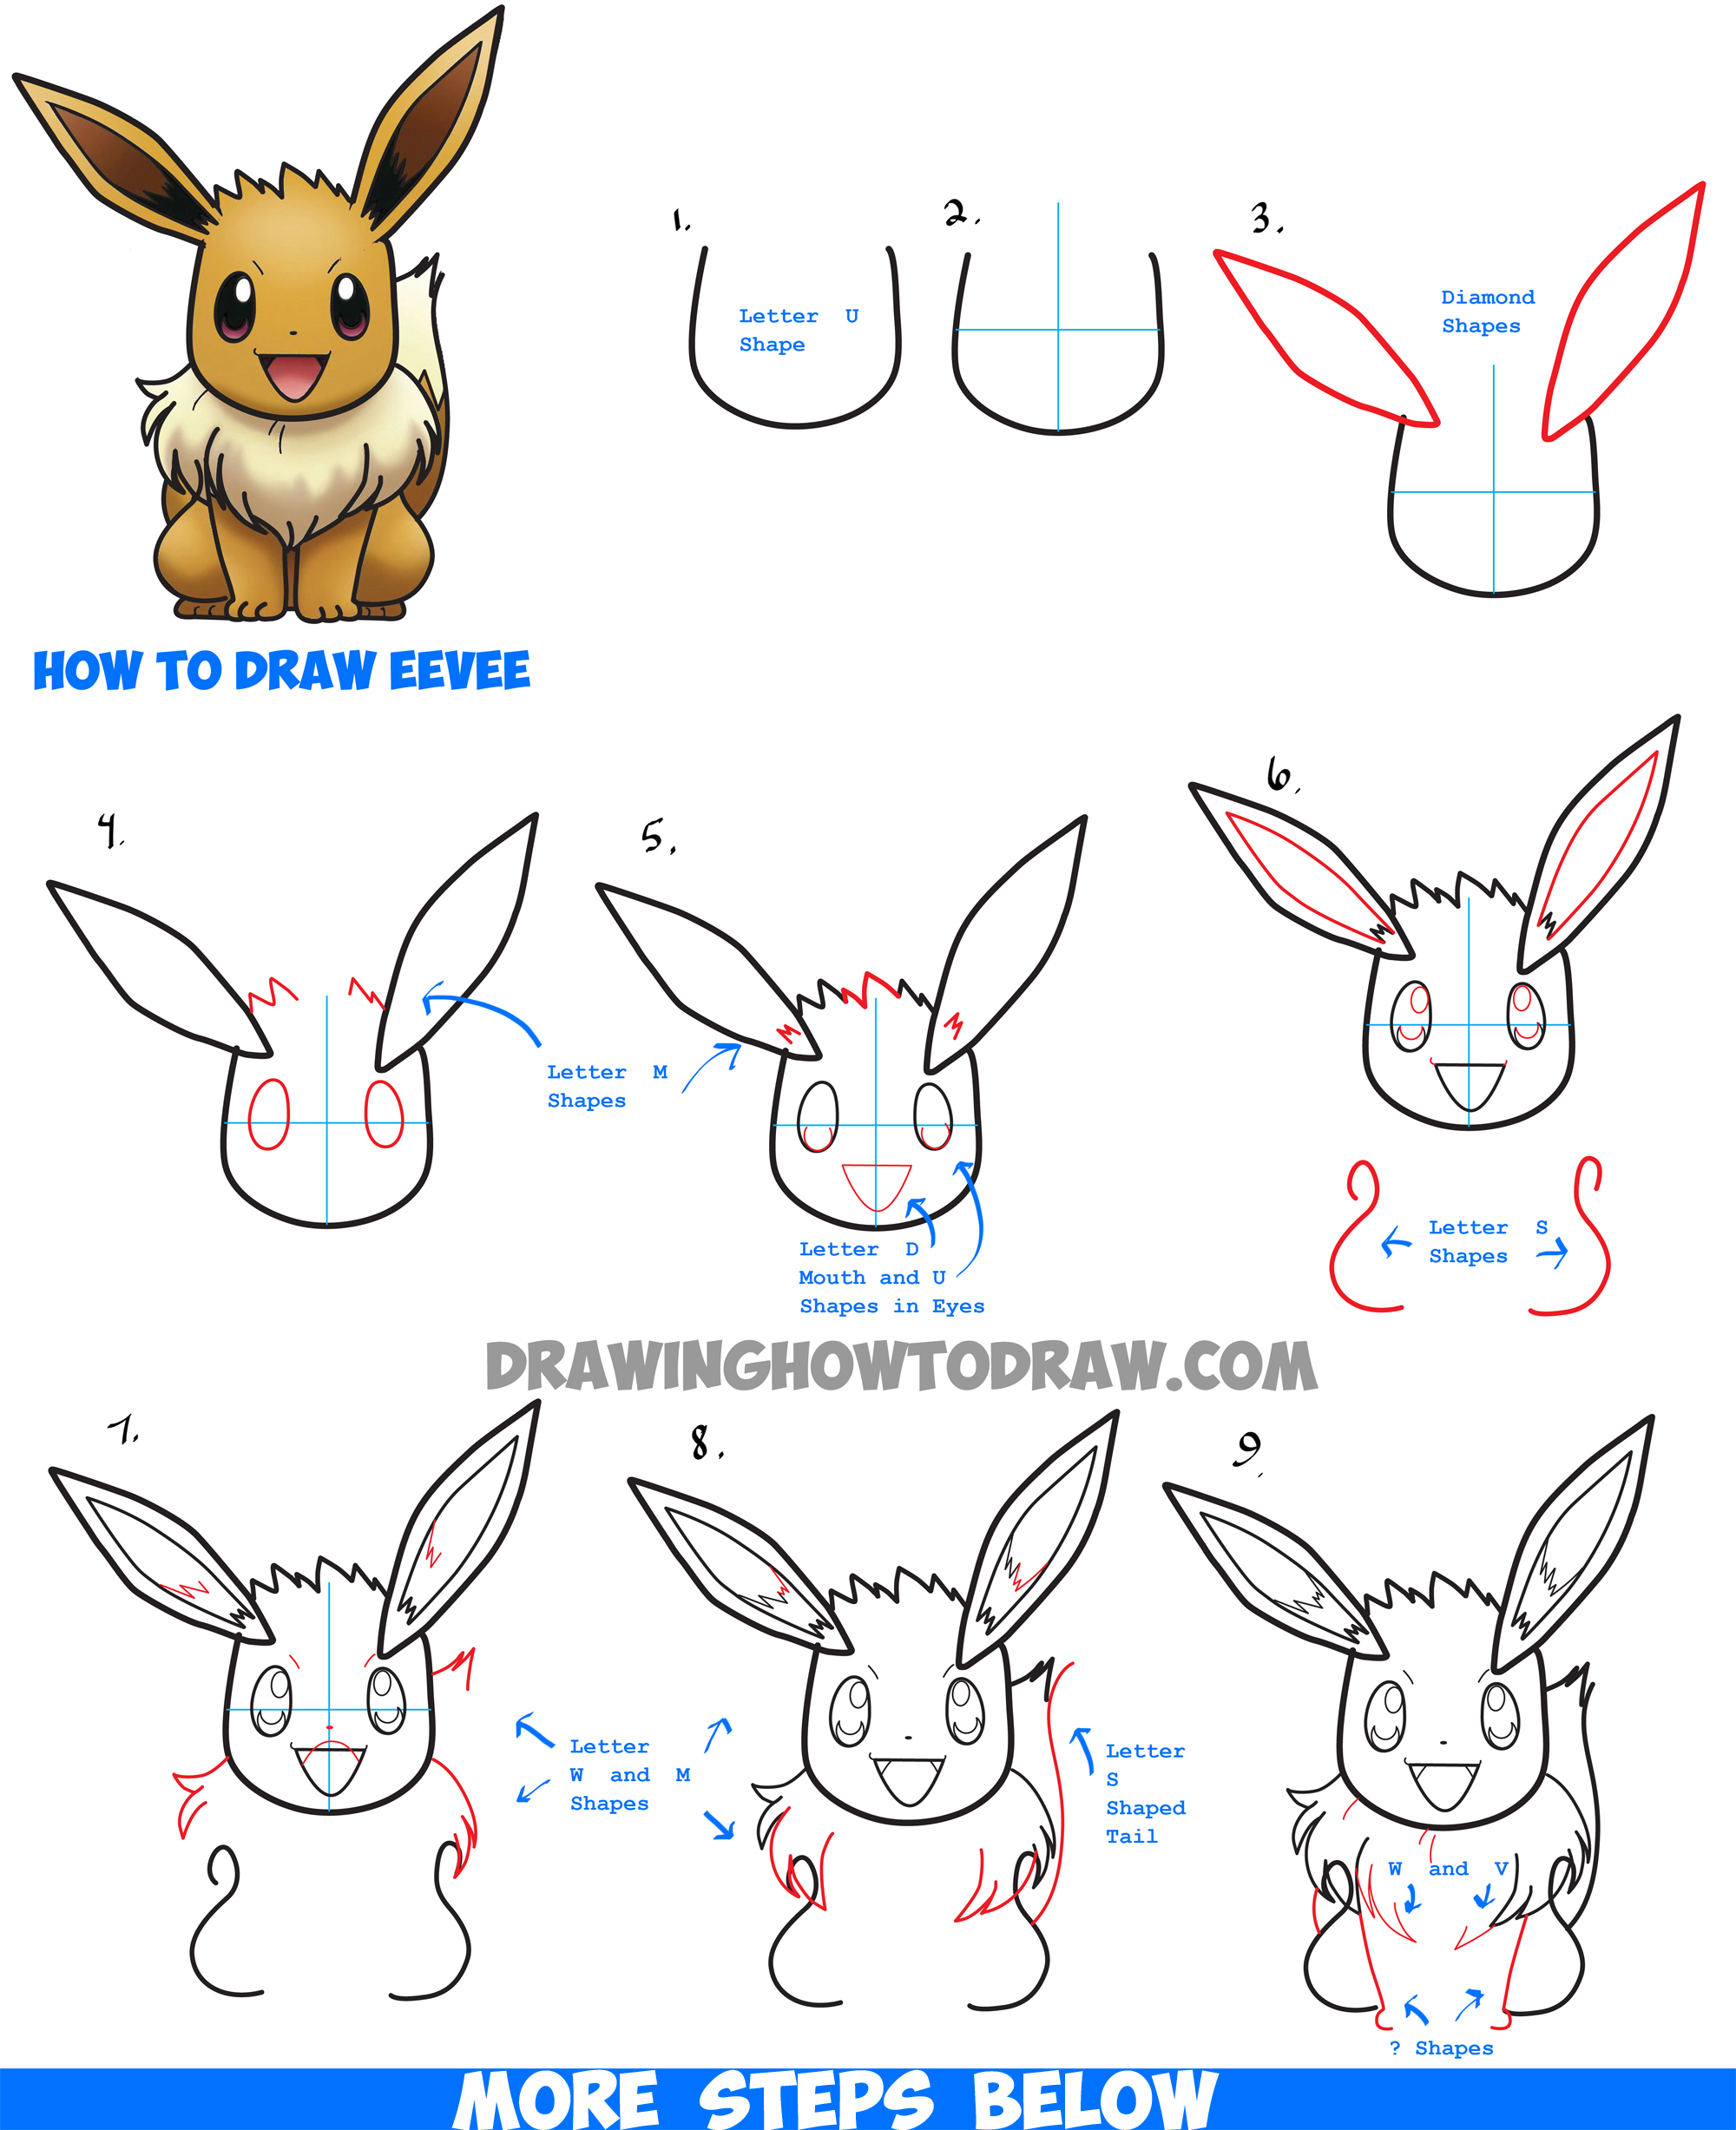 Learn How to Draw Eevee from Pokemon (and Pokemon Go) with Simple Steps